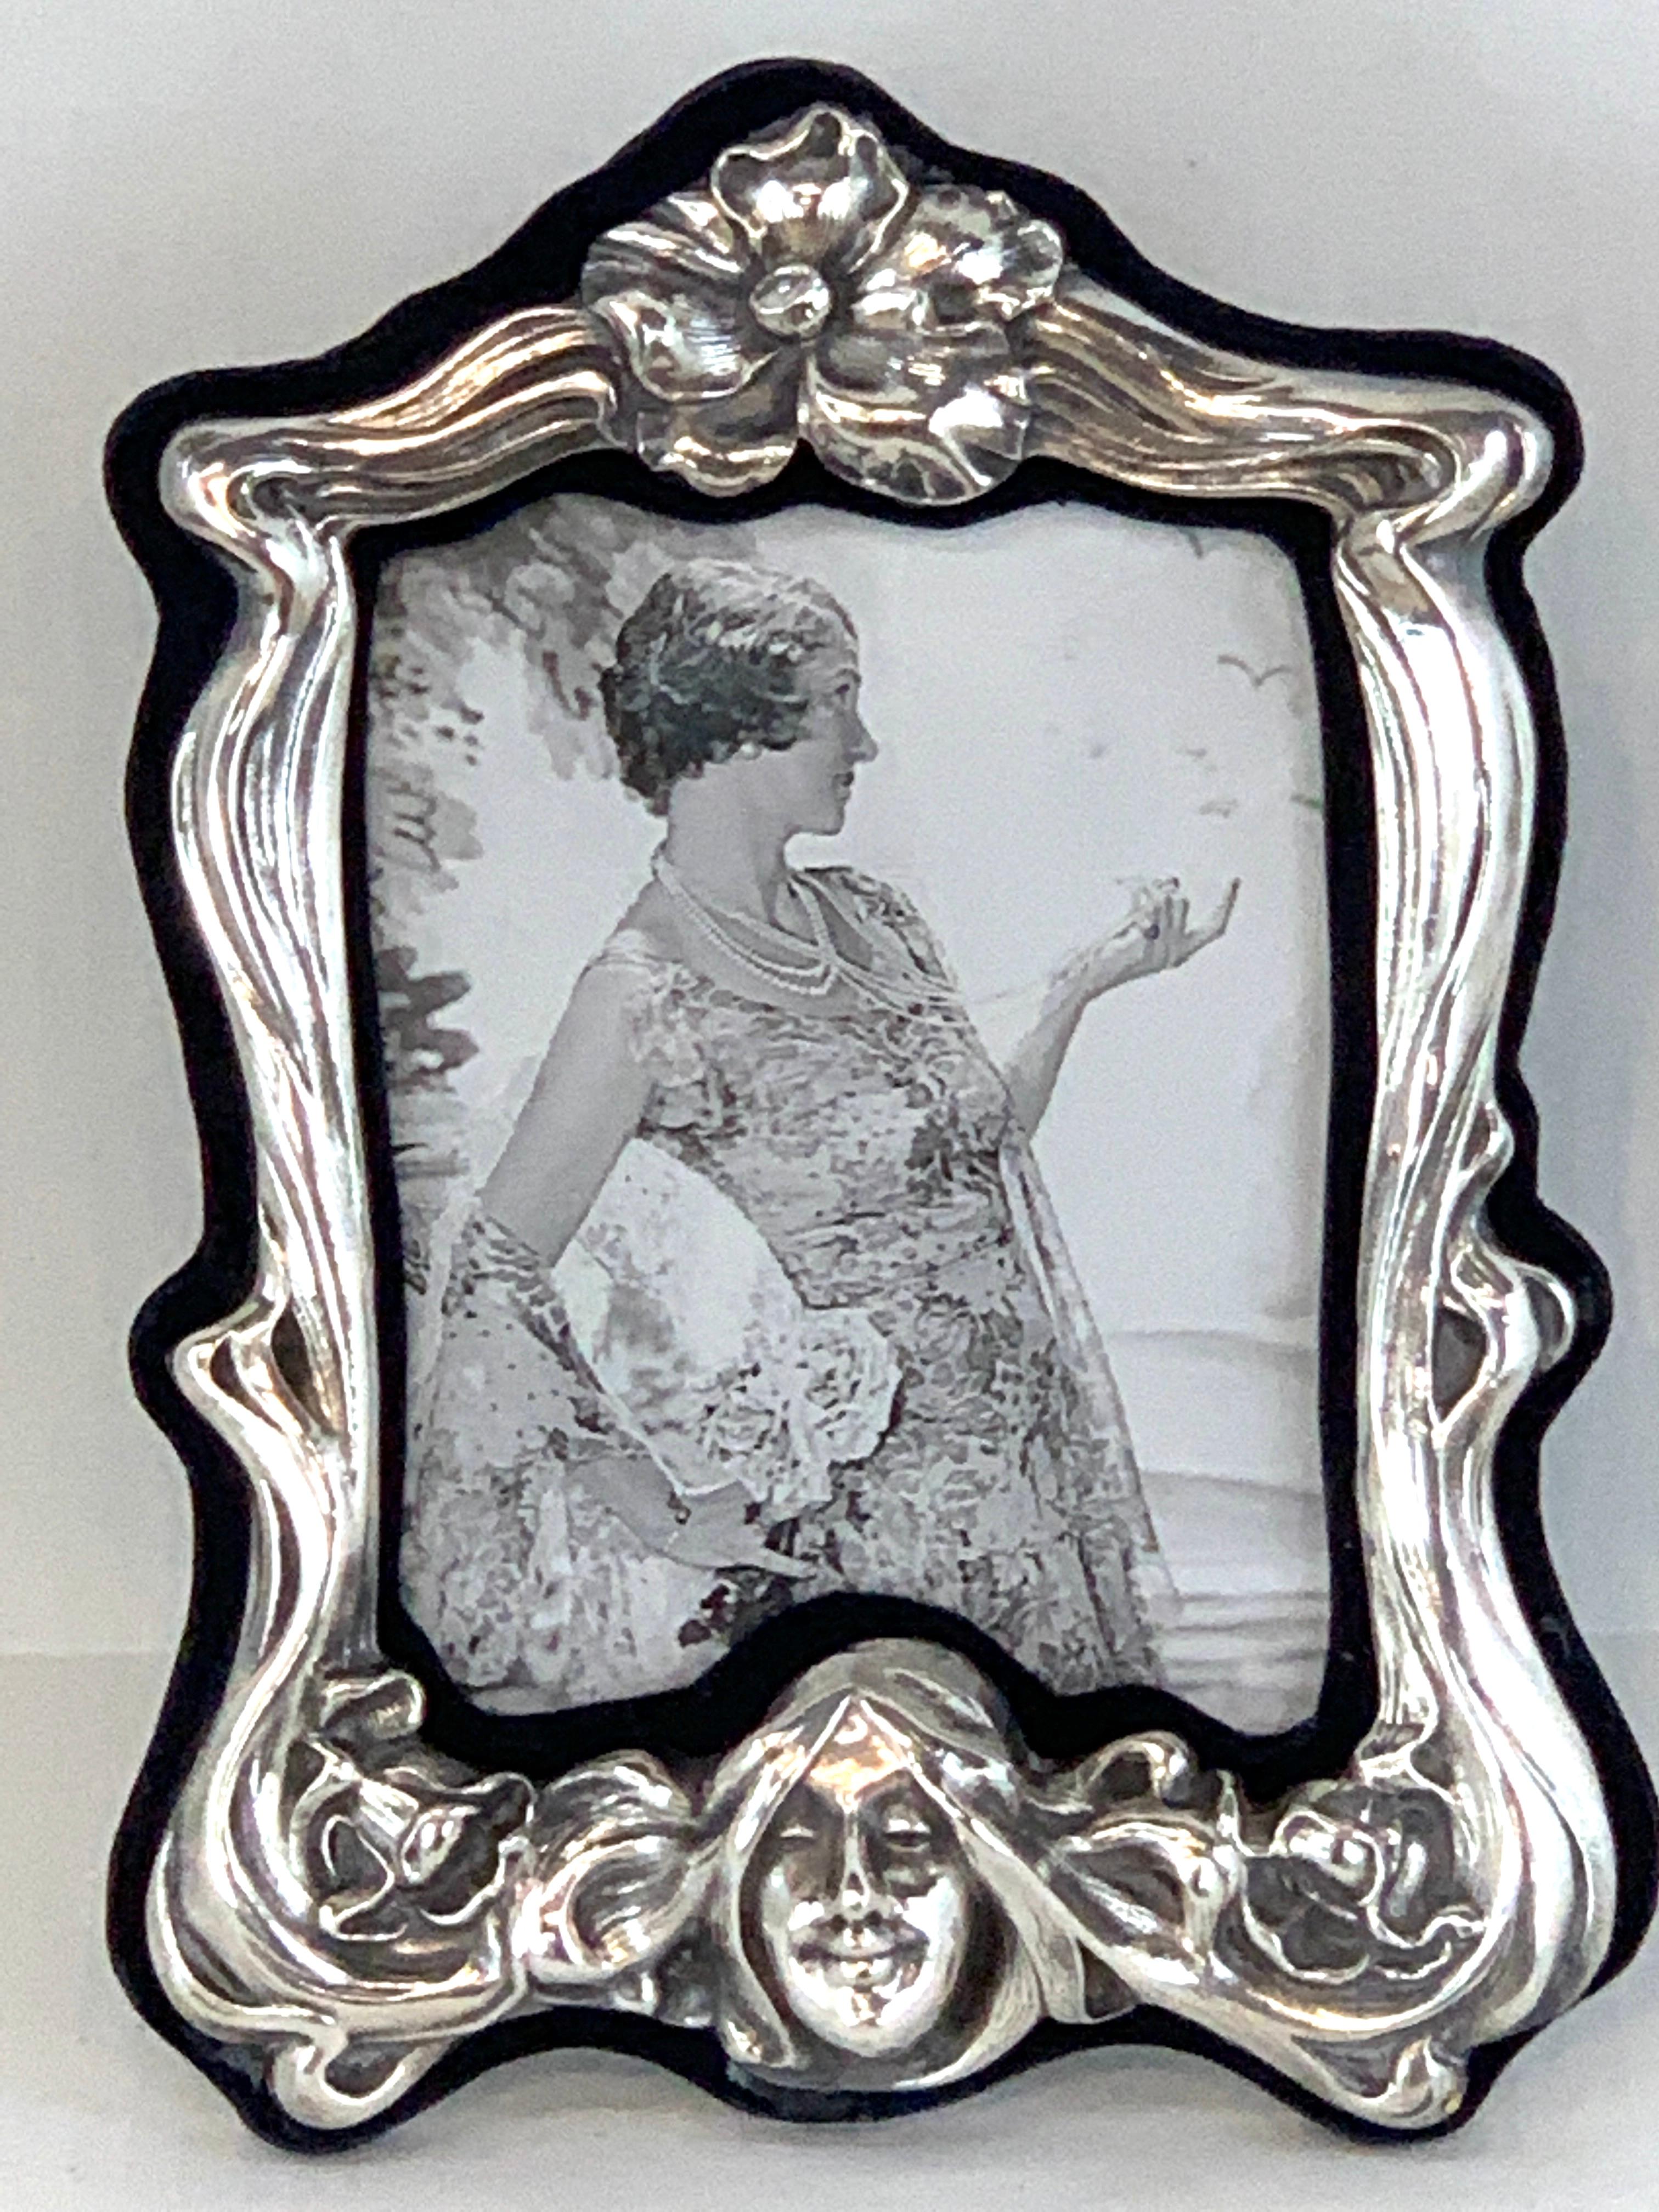 Art Nouveau sterling lady motif figural frame, of exceptional size and quality, the flowing floral surround with central maiden medallion head at the base. Holds a 5